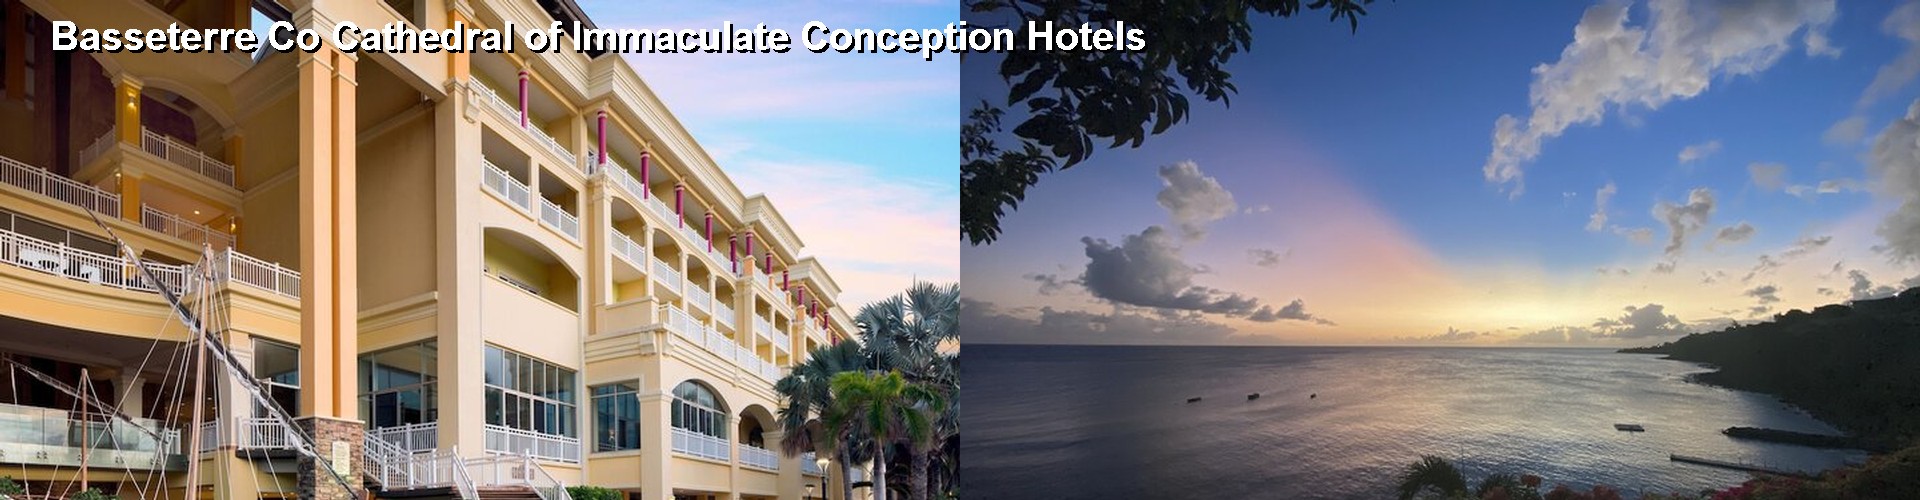 5 Best Hotels near Basseterre Co Cathedral of Immaculate Conception